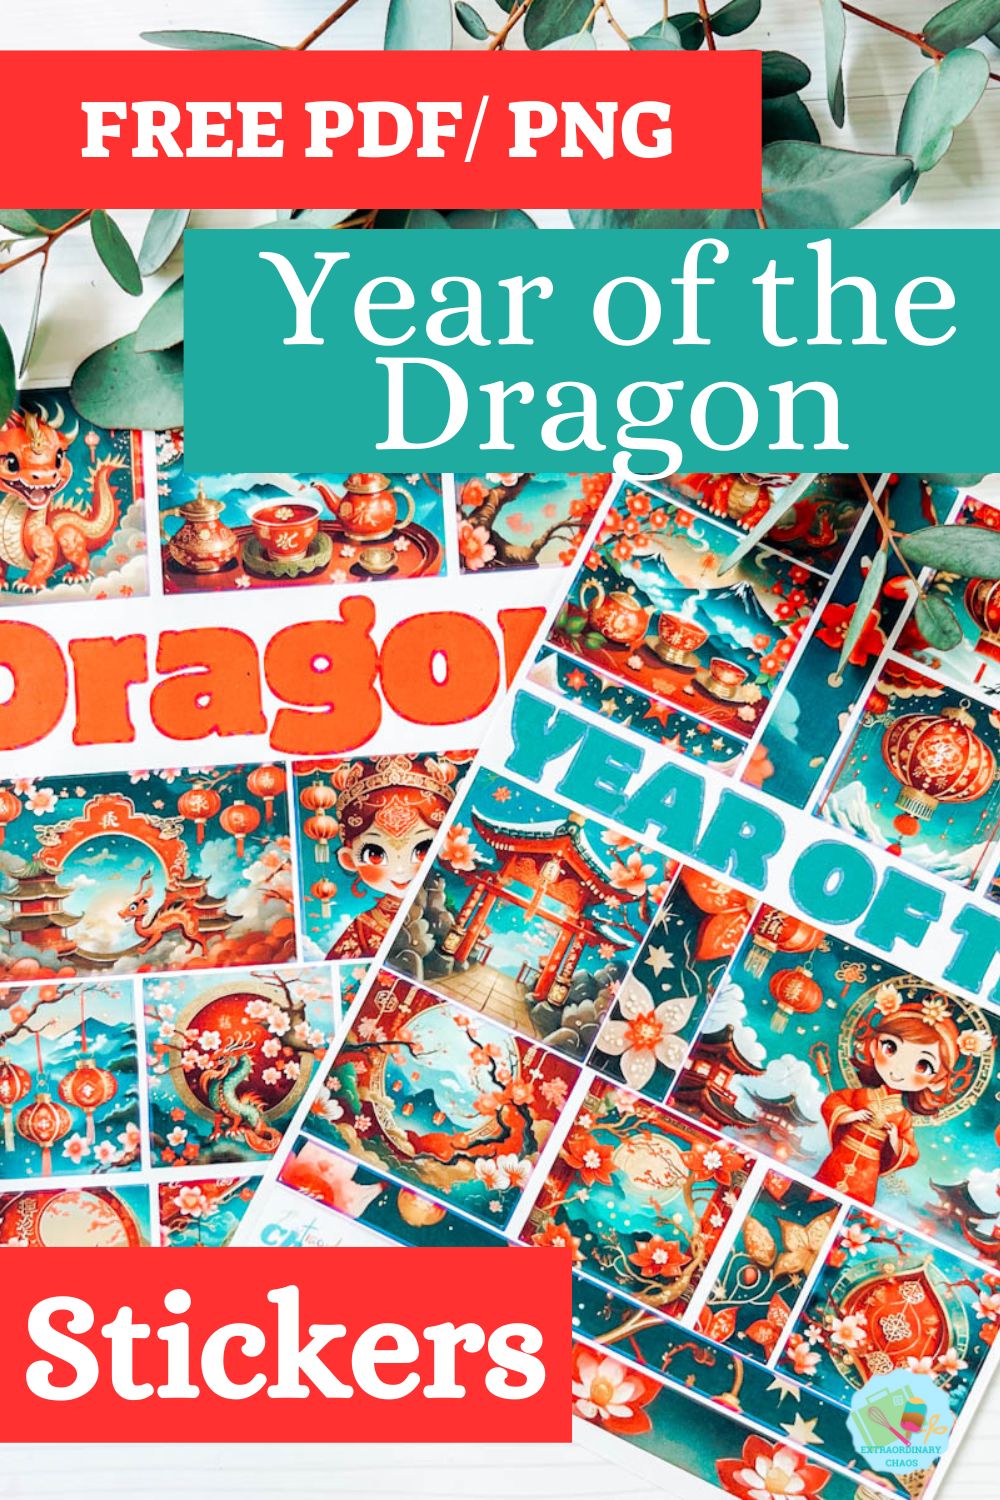 Free PDF PNG Chinese New Year, Year of the Dragon printable Stickers for Cricut and Silhouette